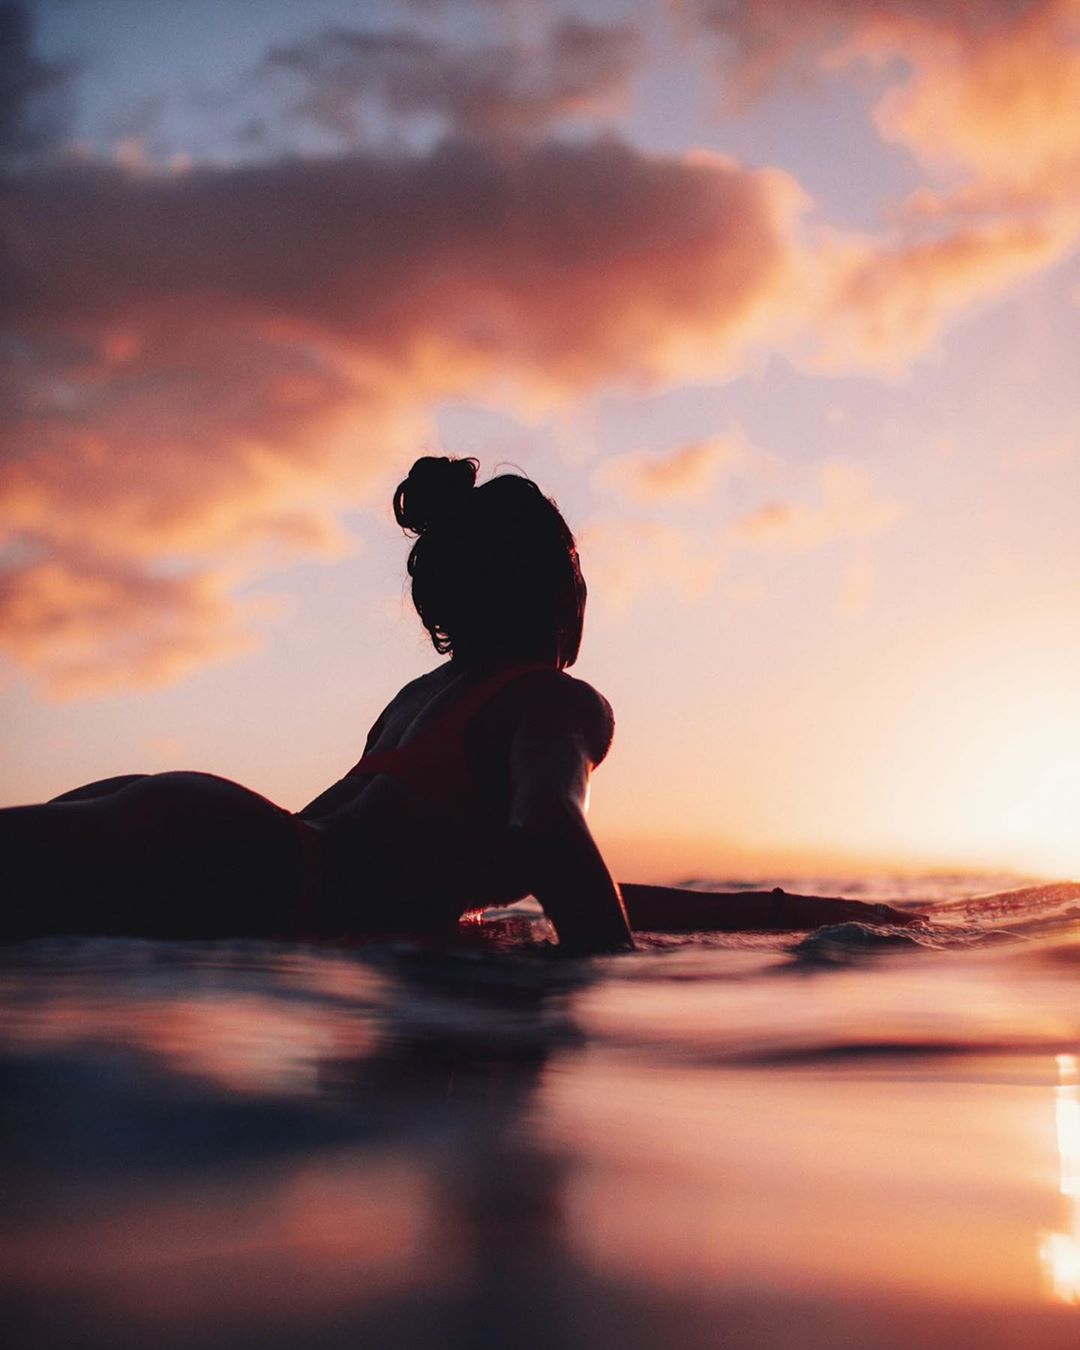 The feeling of the sun setting and the moon rising and just one more..  -
Sunset in Waikiki shot on Canon 5DIV 50mm 1.2 by @cobiandewey #surfstoke #Hawaii